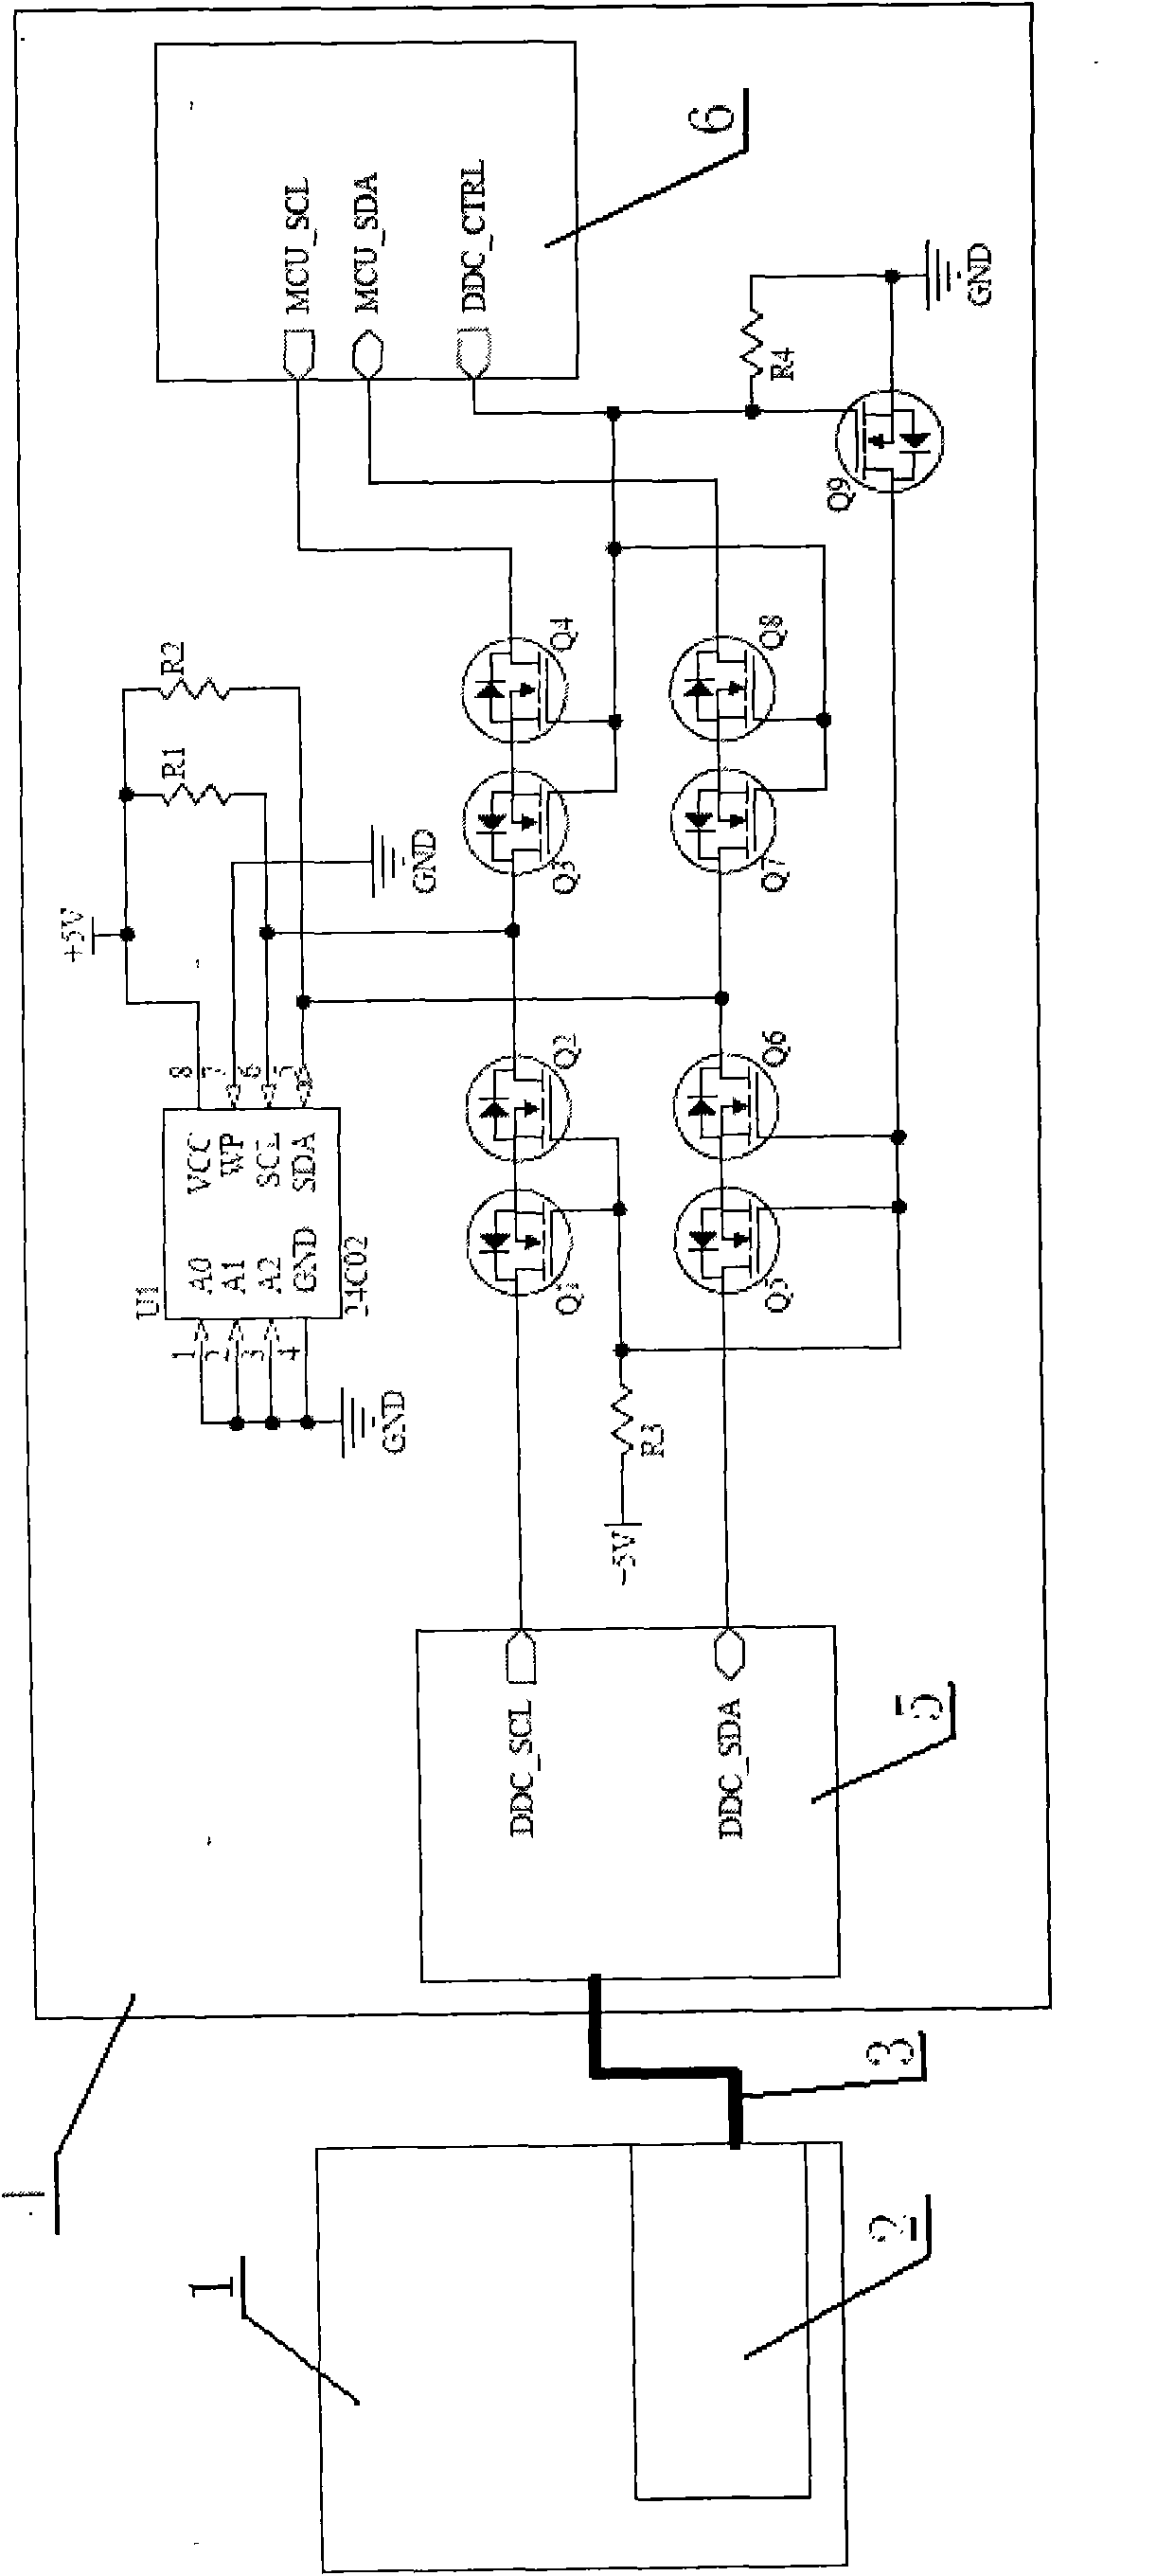 Insulation protective circuit for DDC (Direct Digital Control) interface